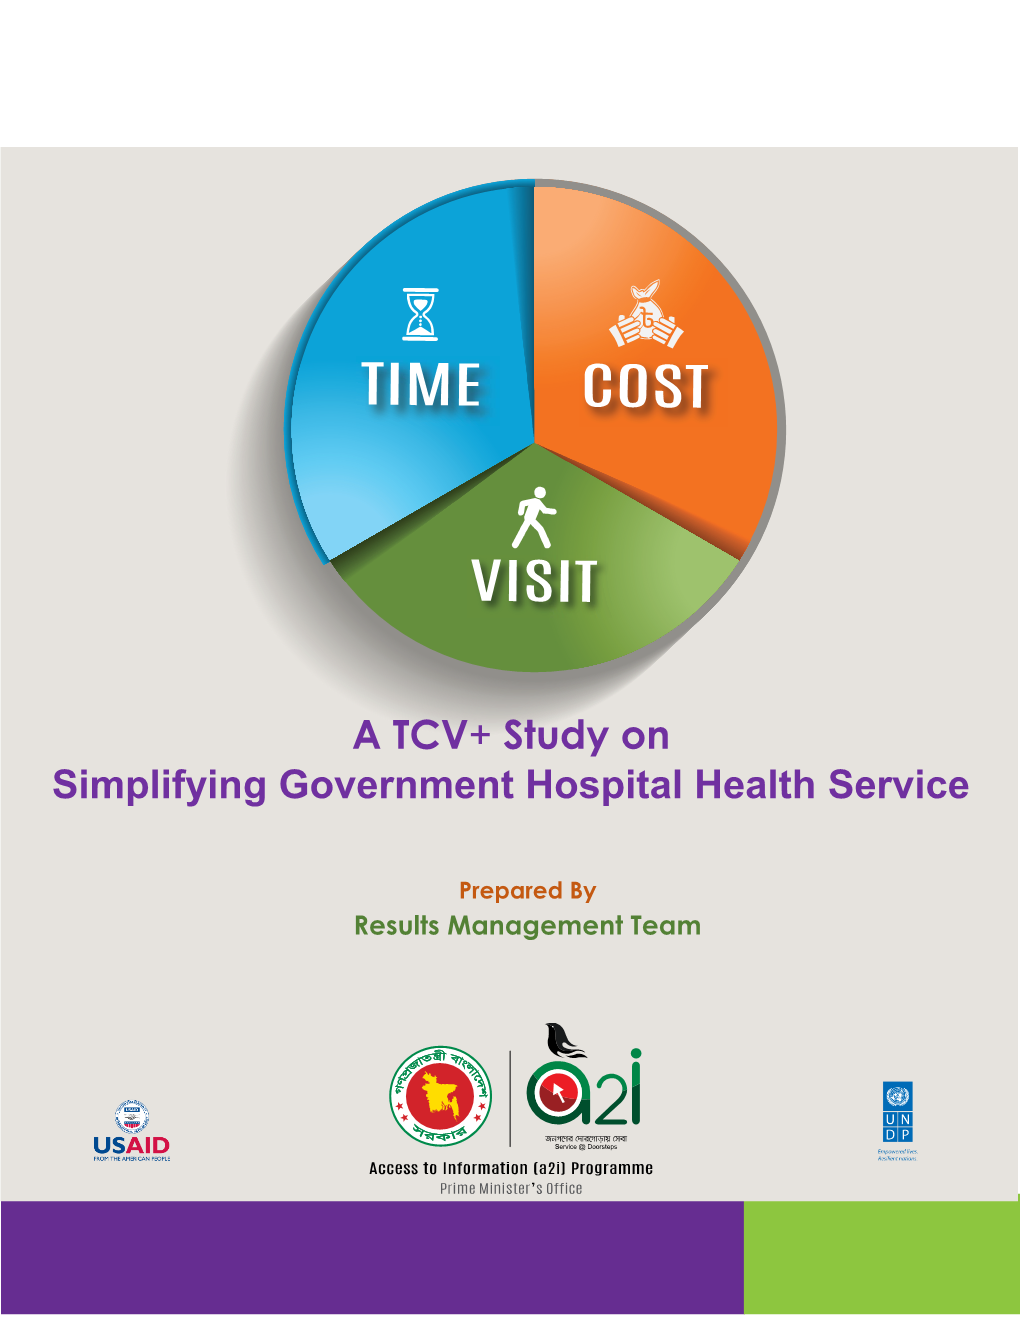 A TCV+ Study on Simplifying Government Hospital Health Service